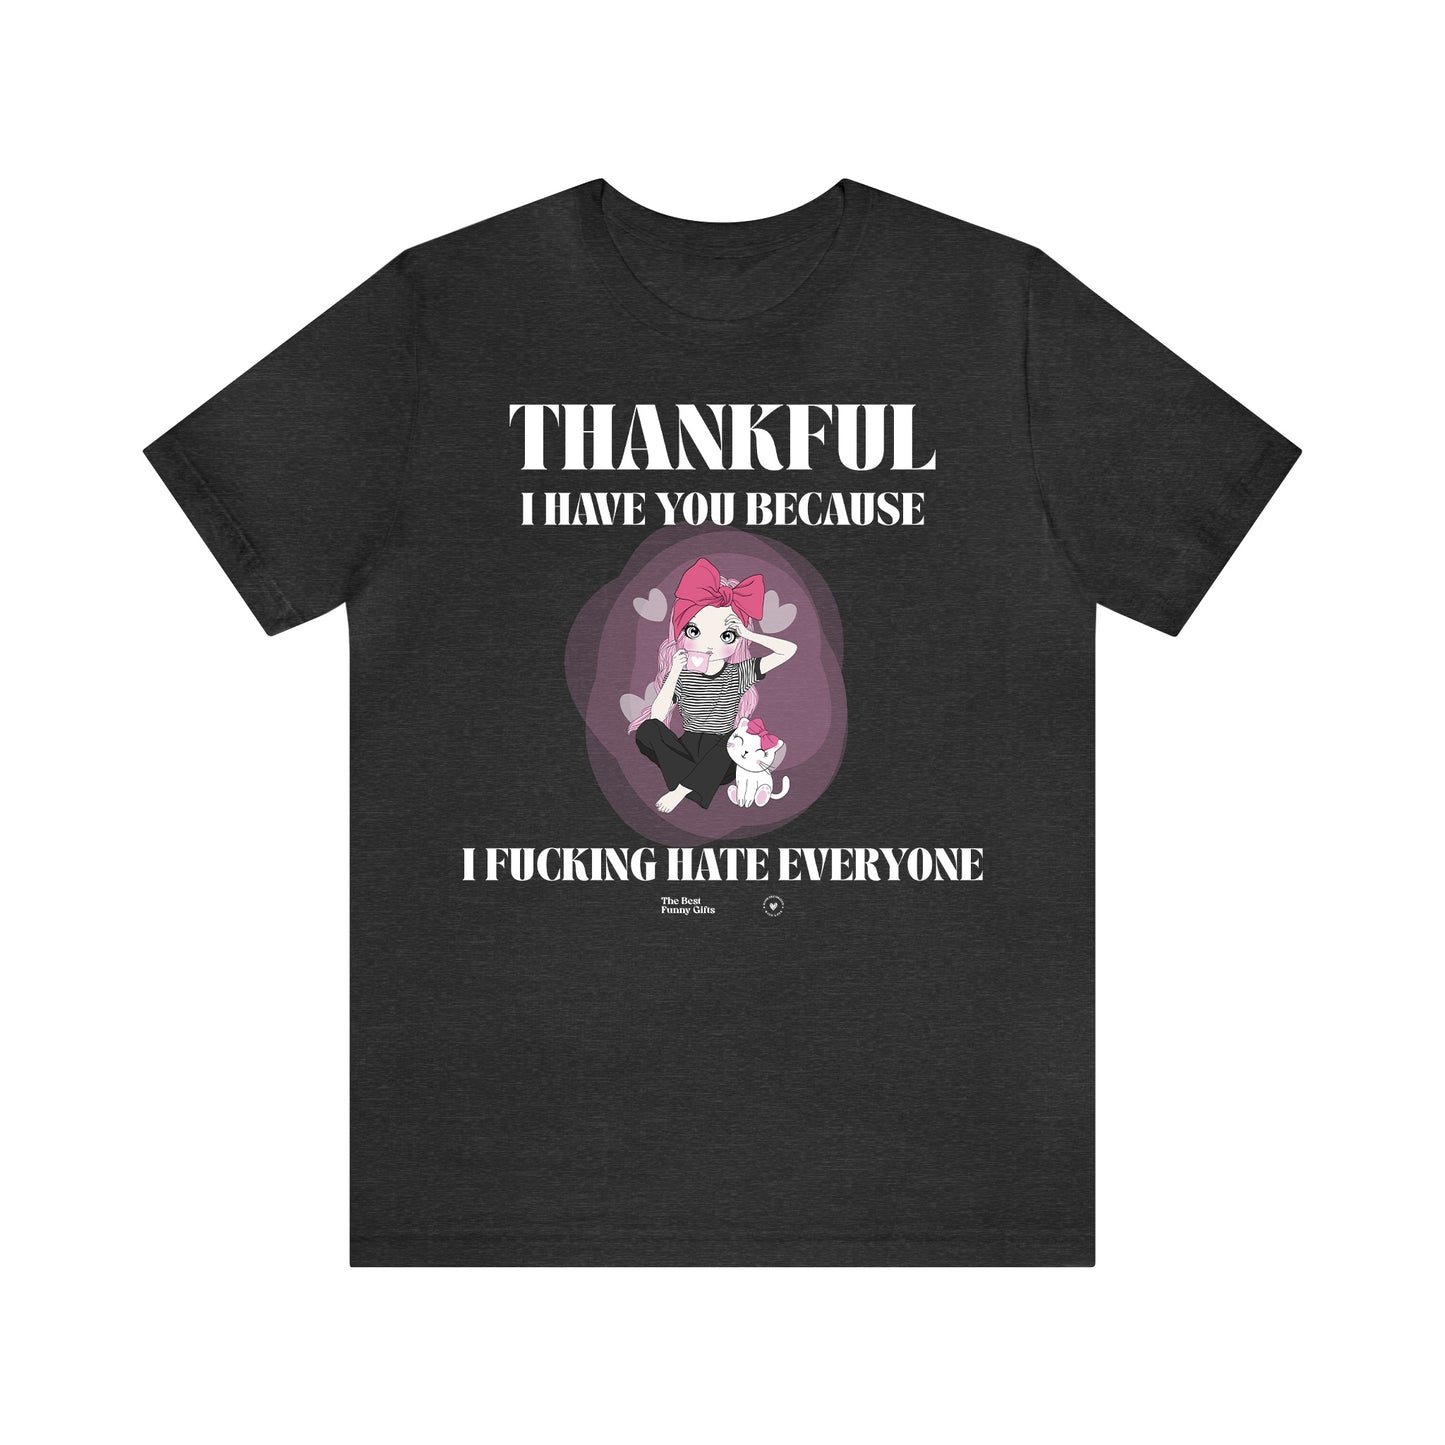 Funny Shirts for Women - Thankful I Have You Because I Fucking Hate Everyone - Women’s T Shirts